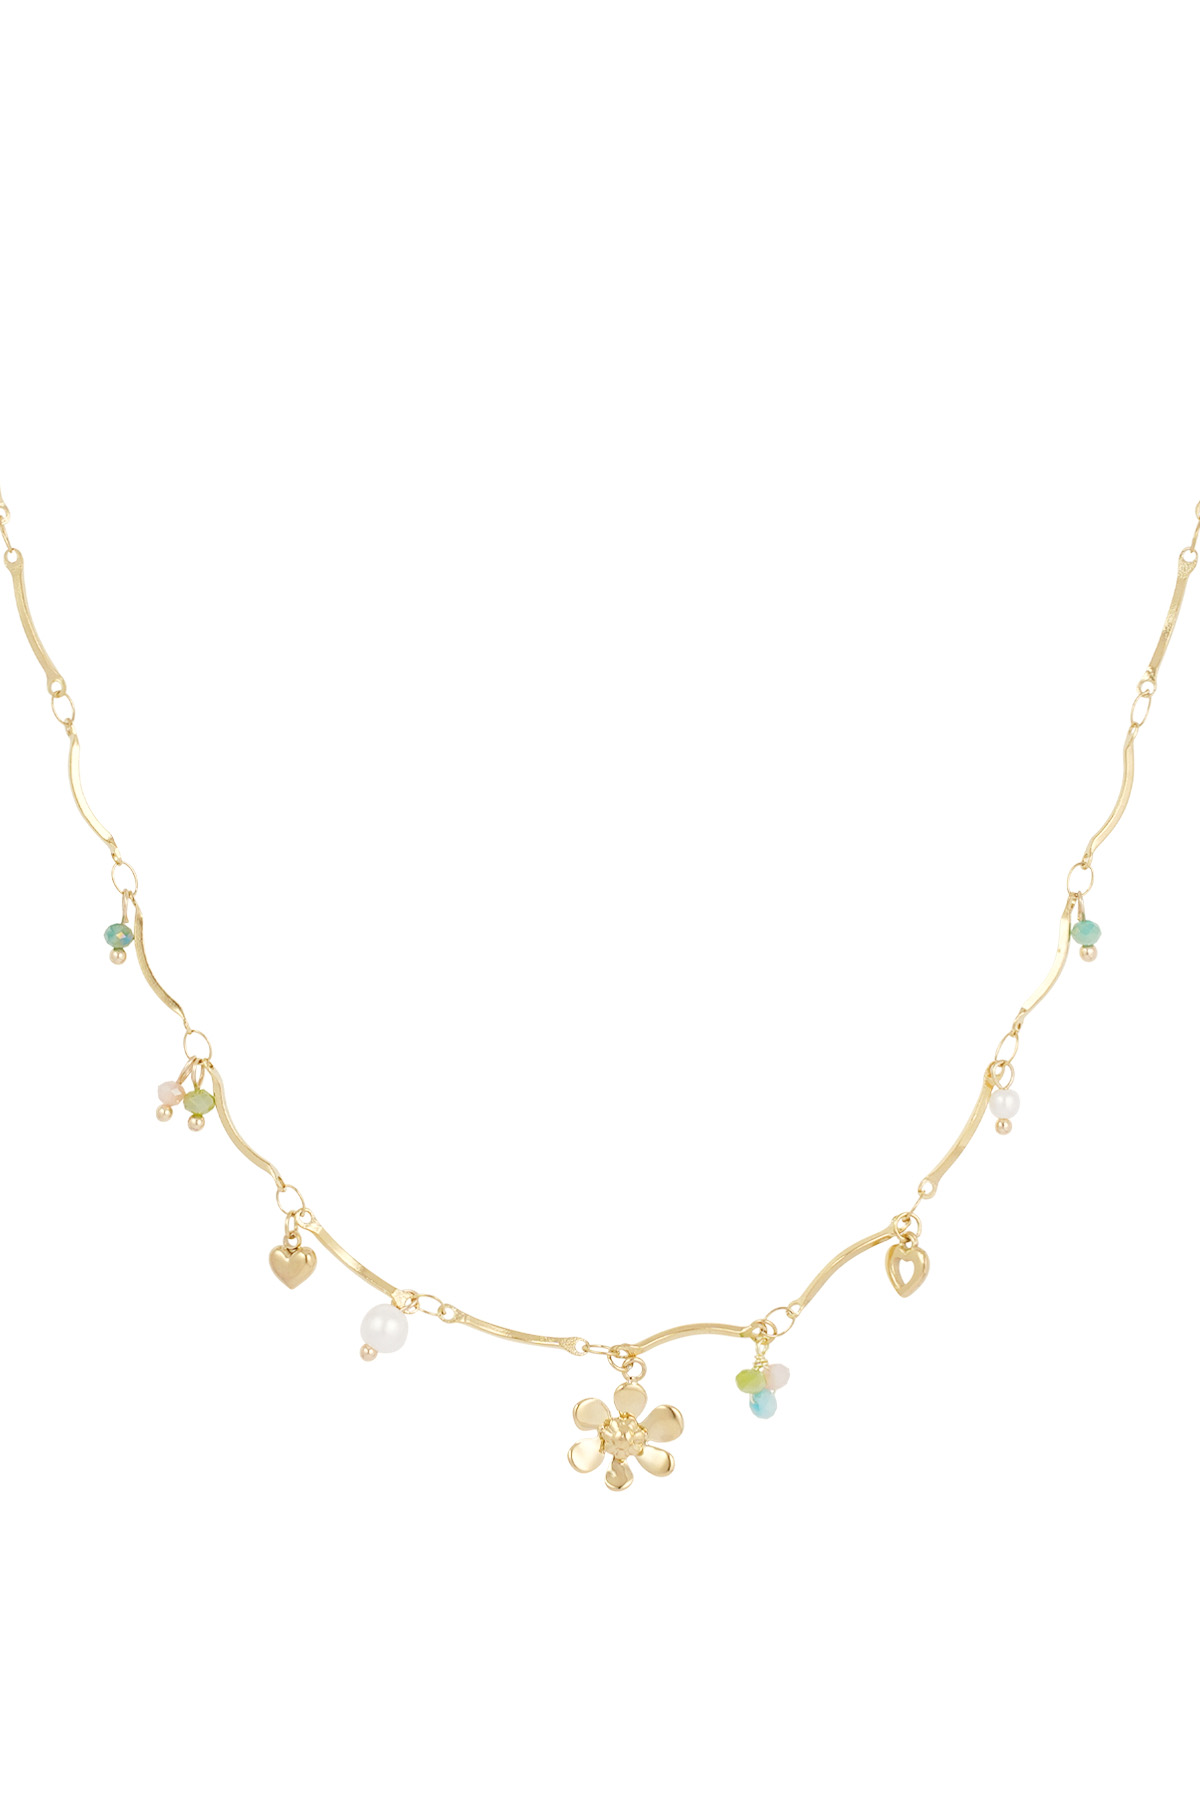 Summer flower charm necklace - gold h5 